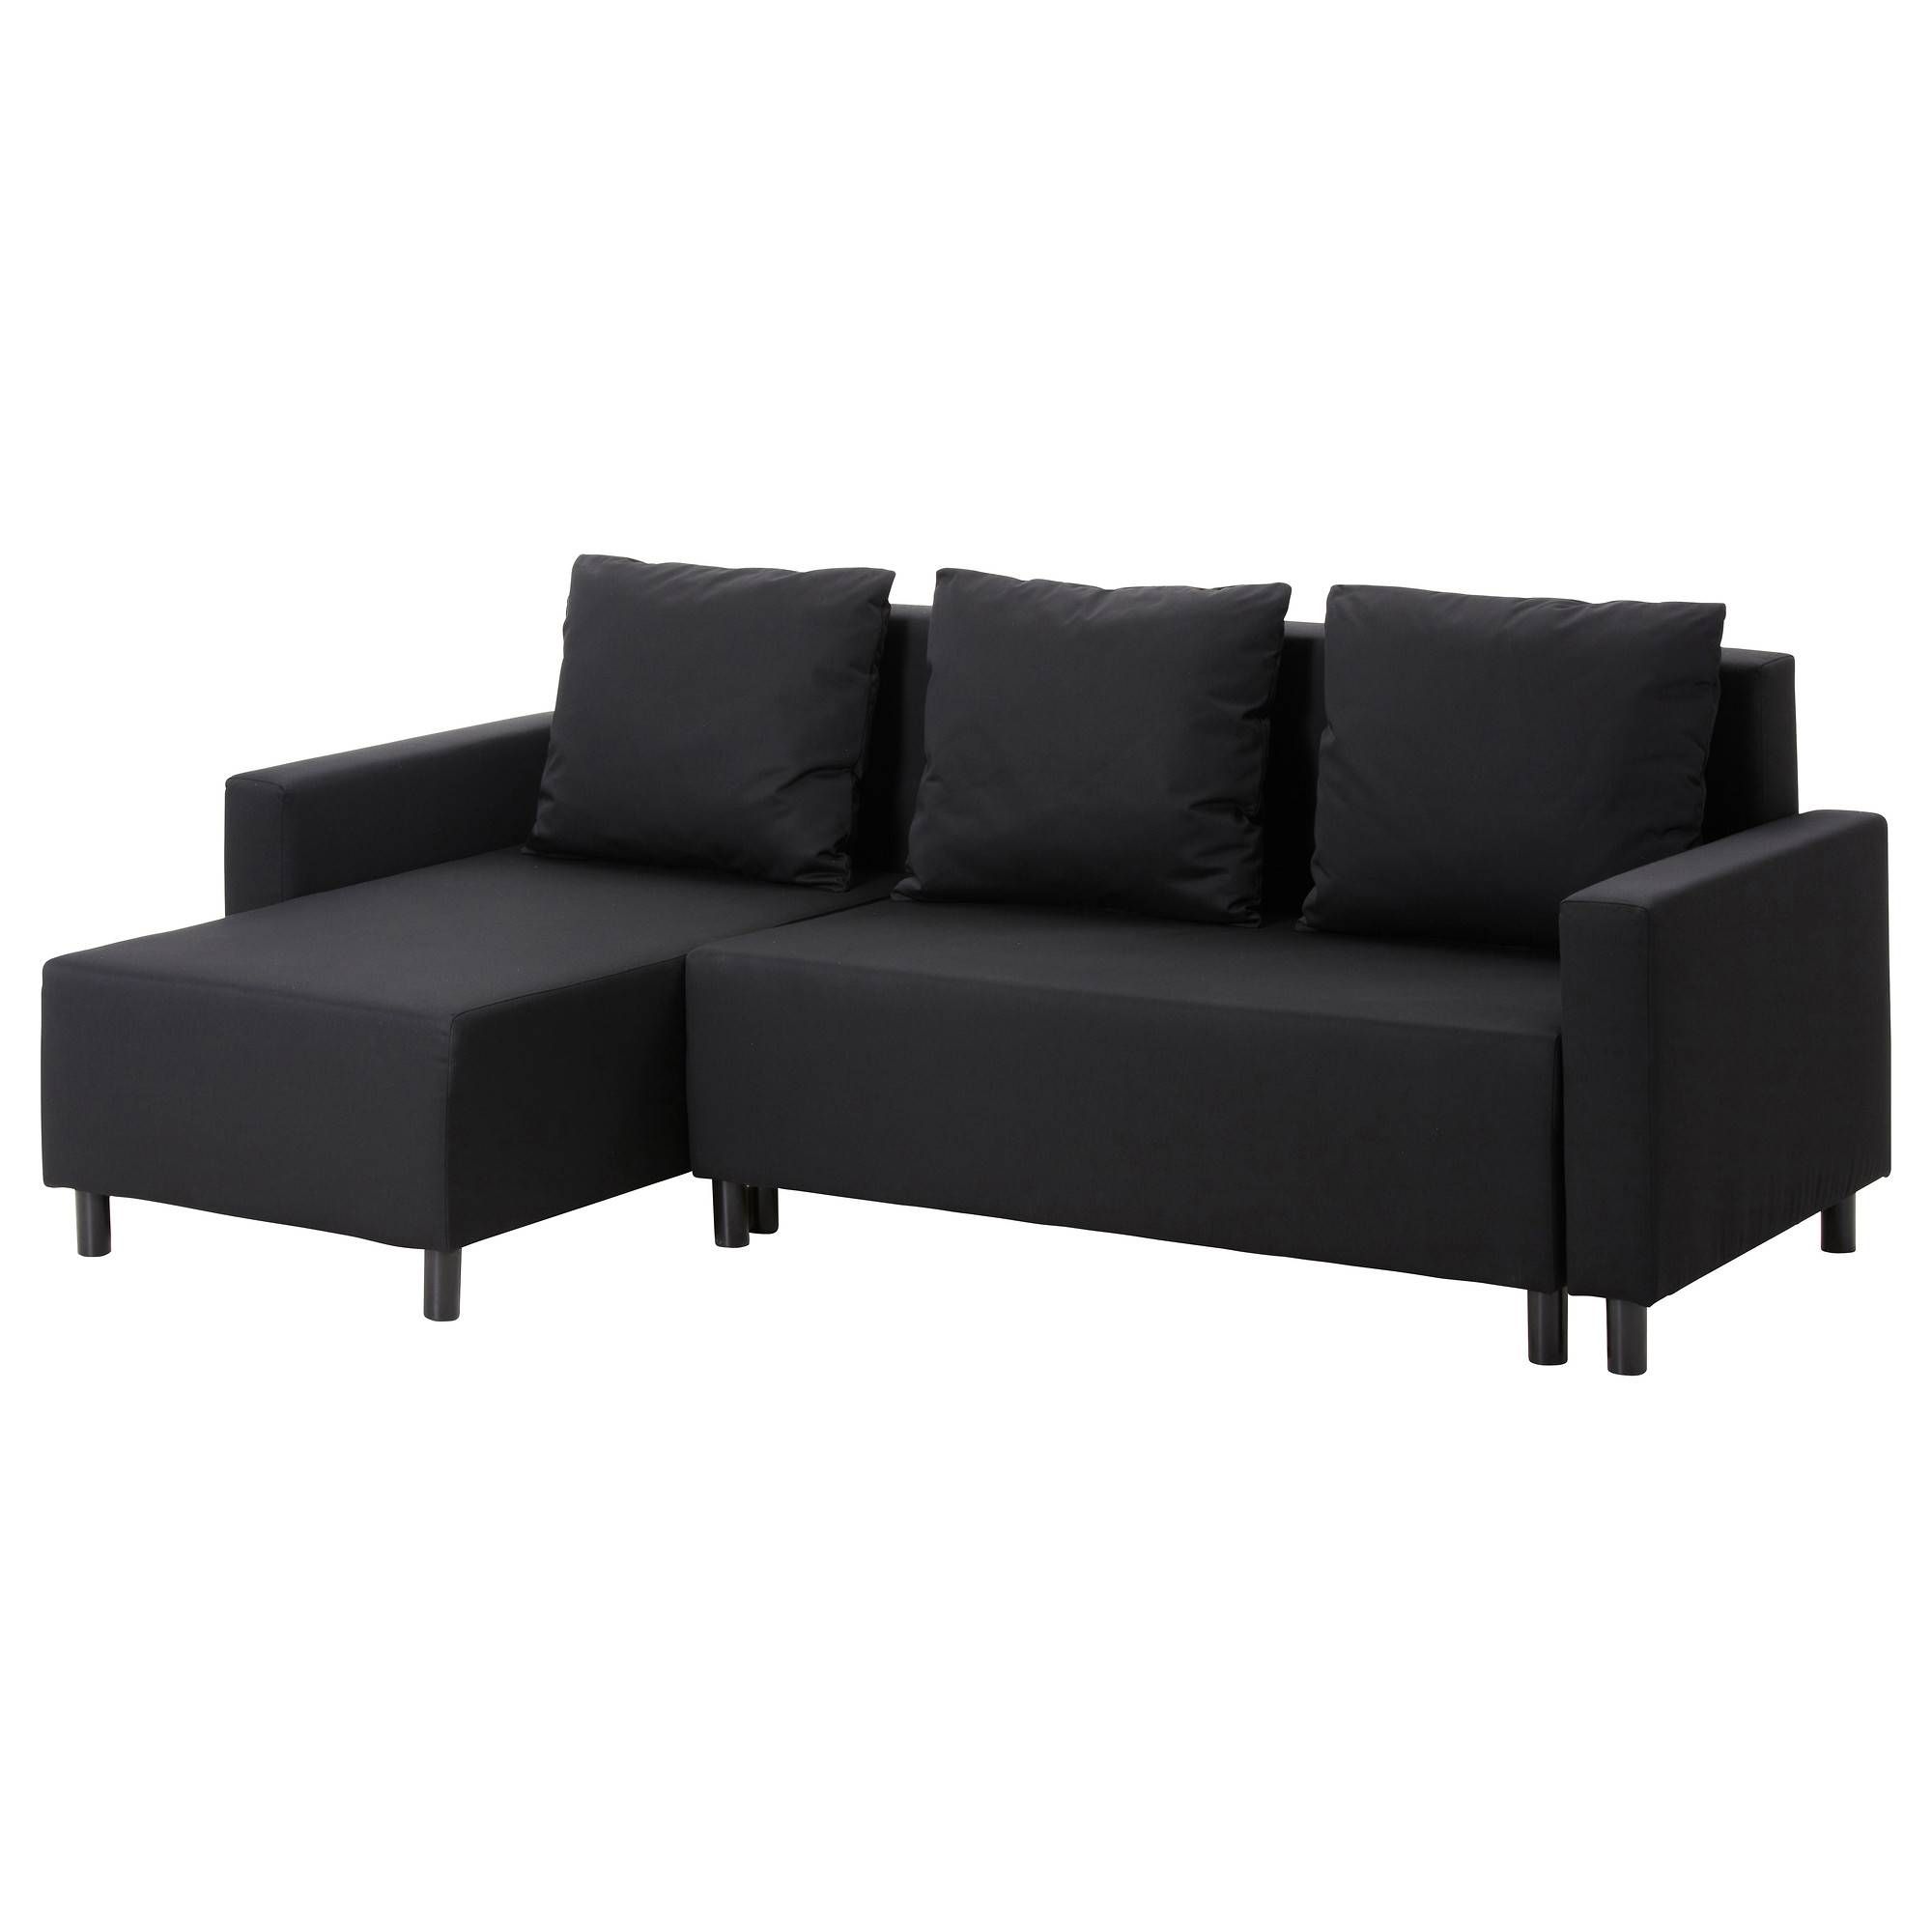 Sofa Beds & Futons – Ikea With Regard To Full Size Sofa Sleepers (View 30 of 30)